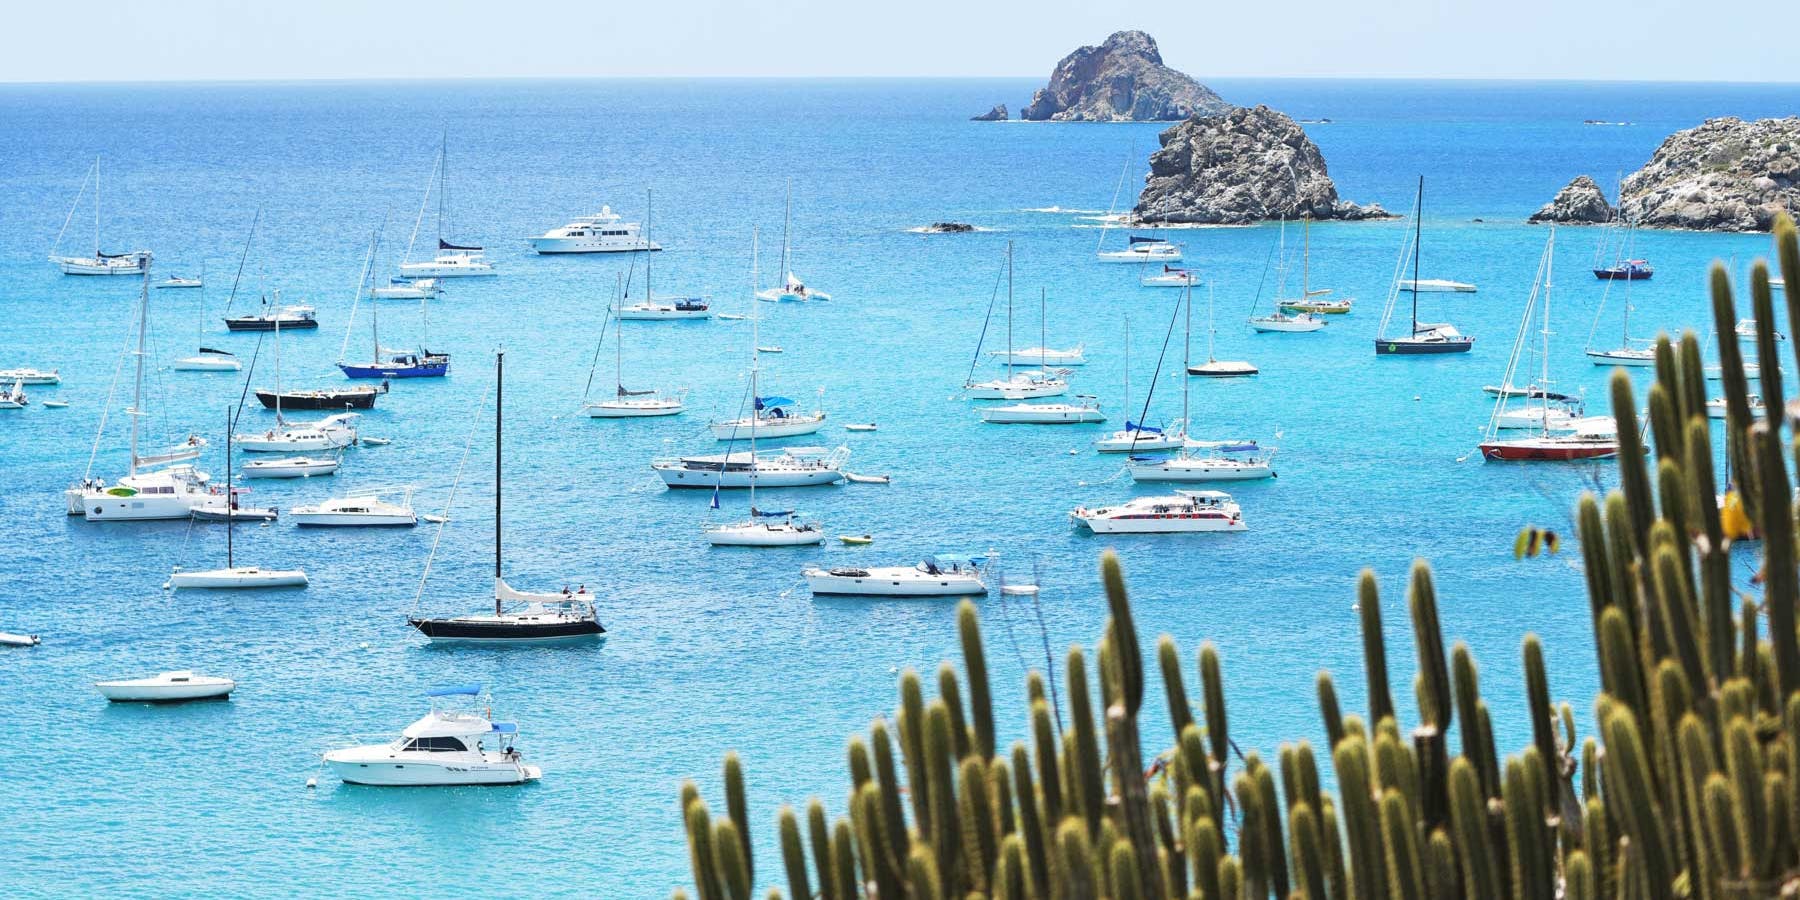 Explore the shores of St Barths